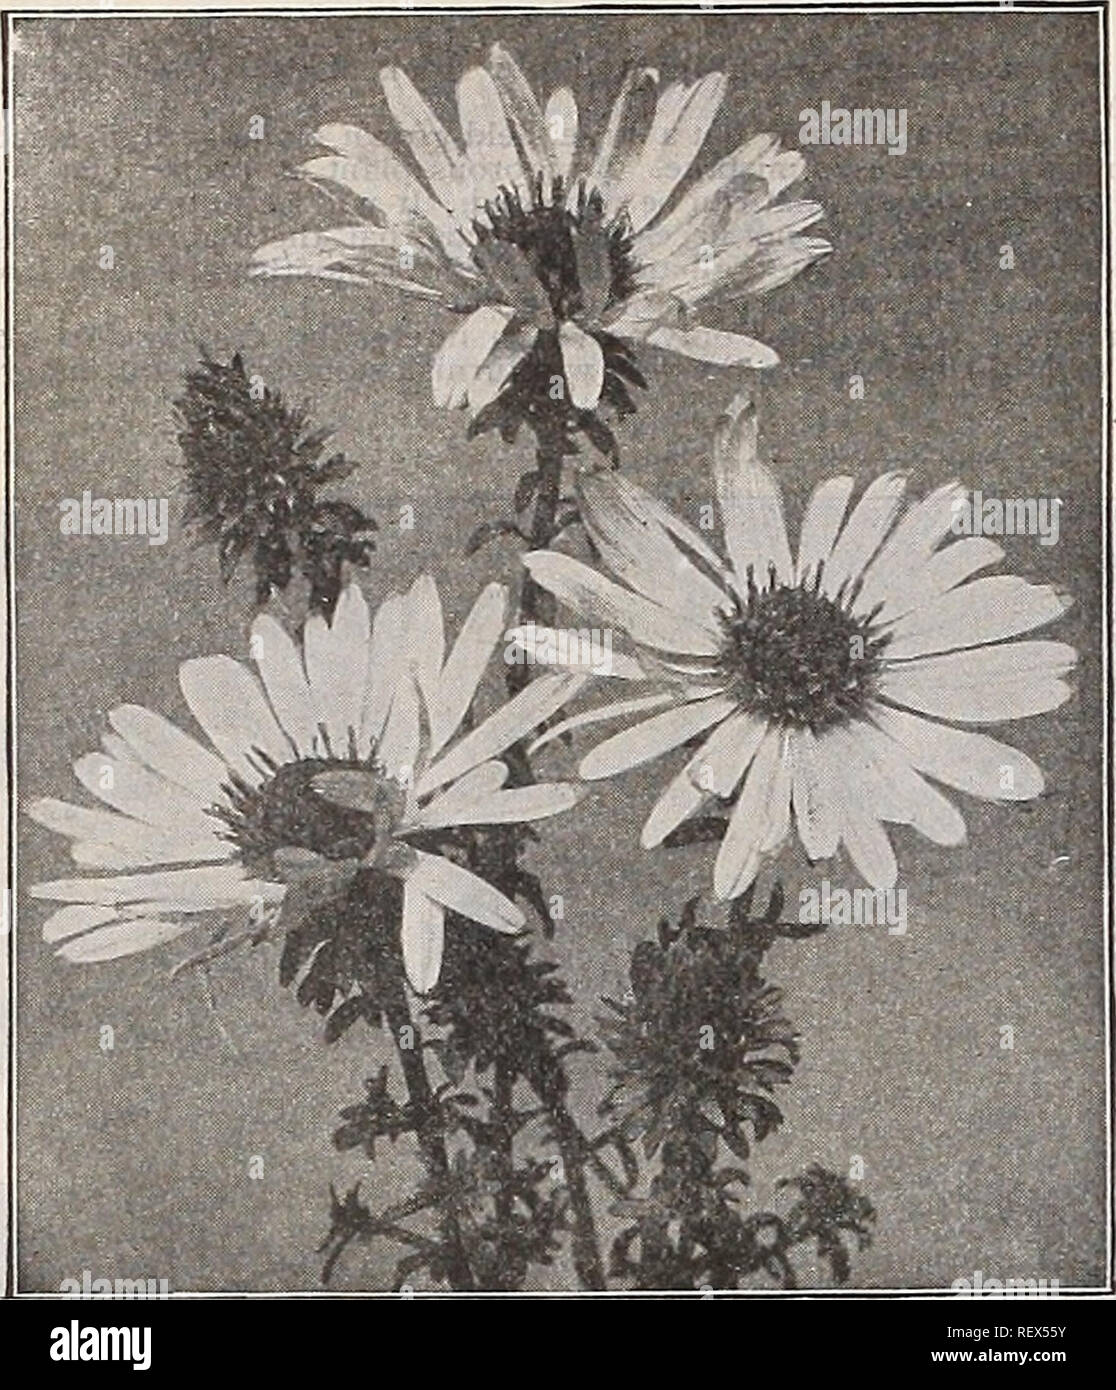 . Dreer's wholesale price list : seeds for florists plants vegetable seeds, tools, fertilizers and sundries. Bulbs (Plants) Catalogs; Flowers Seeds Catalogs; Vegetables Seeds Catalogs; Nurseries (Horticulture) Catalogs. 40 W &quot;ff T HENRY A. DREER, Philadelphia, Pa.. ASTER GRANDIFLORUS Arenaria. (Sand-wort.) Per doz. Per 100 Caespitosa. 3-inch pots $0 85 $6 00 Montana. 2%-inch pots 85 6 00 Armeria. (Thrift—Sea Pink.) Maritime Splendens. 3-inch pots &quot; Alba. 3-inch pots Artemesia. Abrotamnum. Strong divisions Purshiana. 4-inch pots ..... Stellariana. 3-inch pots . . 85 85 6 00 6 00 85 85 Stock Photo